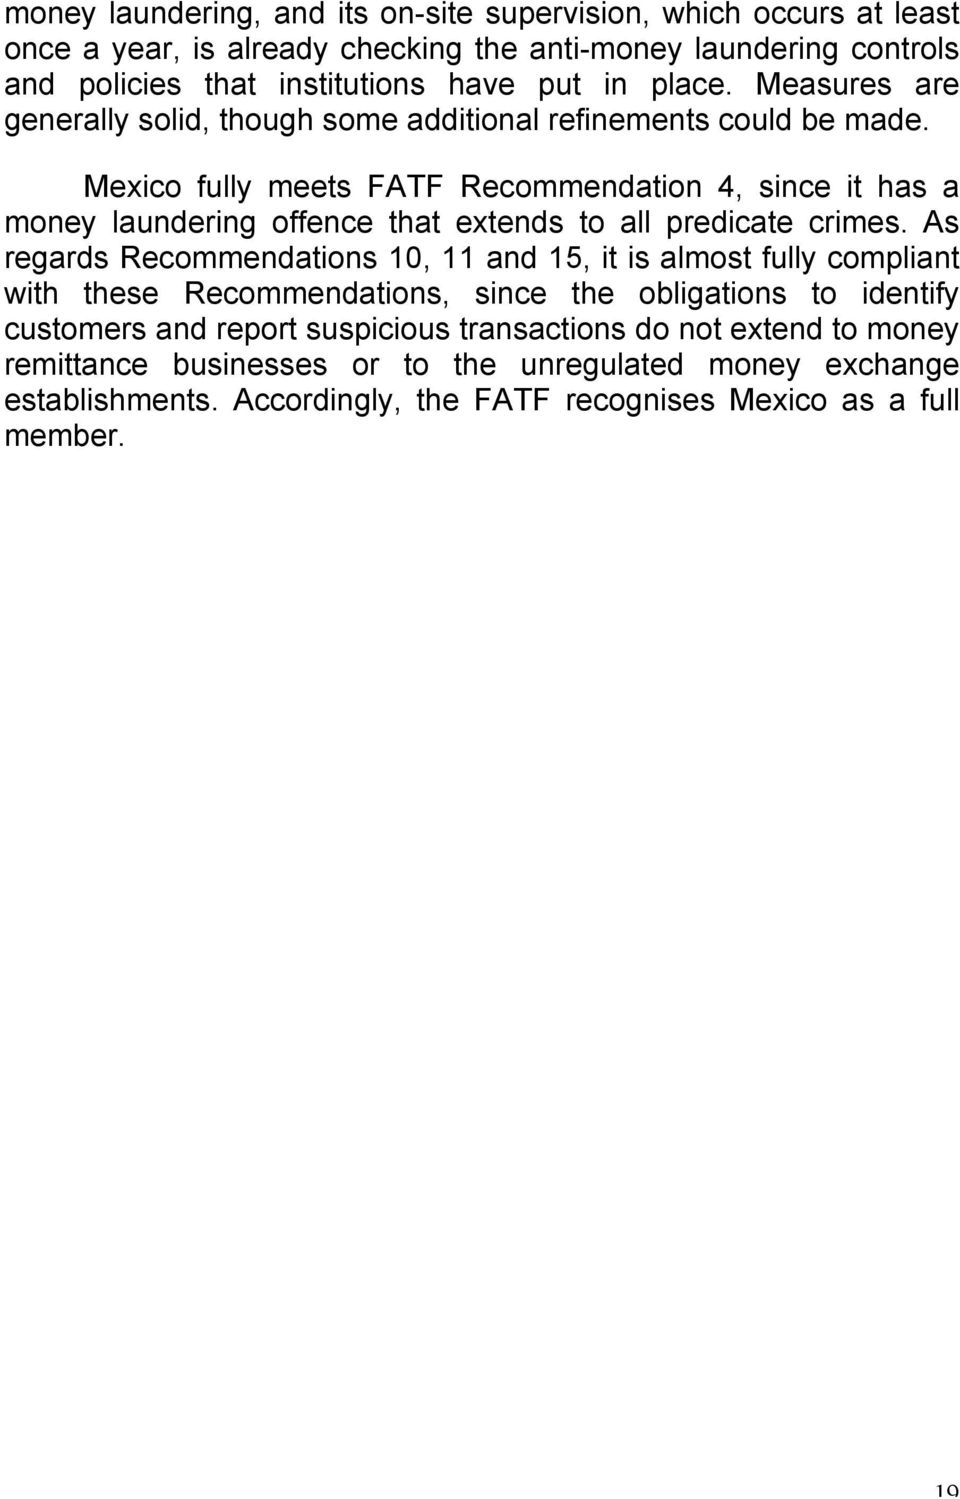 Mexico fully meets FATF Recommendation 4, since it has a money laundering offence that extends to all predicate crimes.